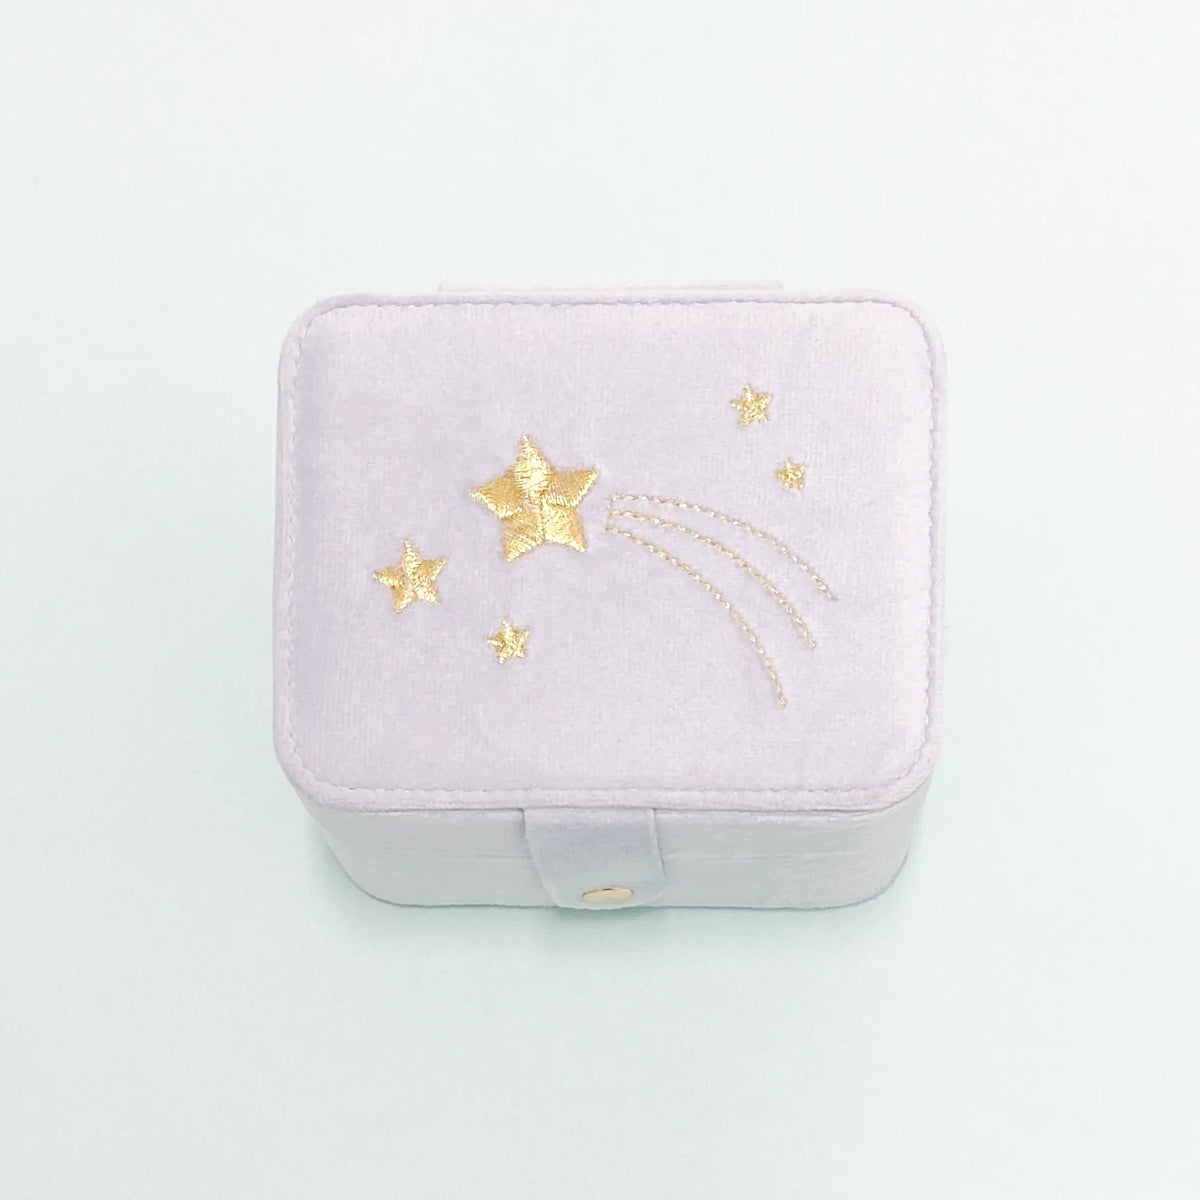 Stardust Jewelry Box Cover